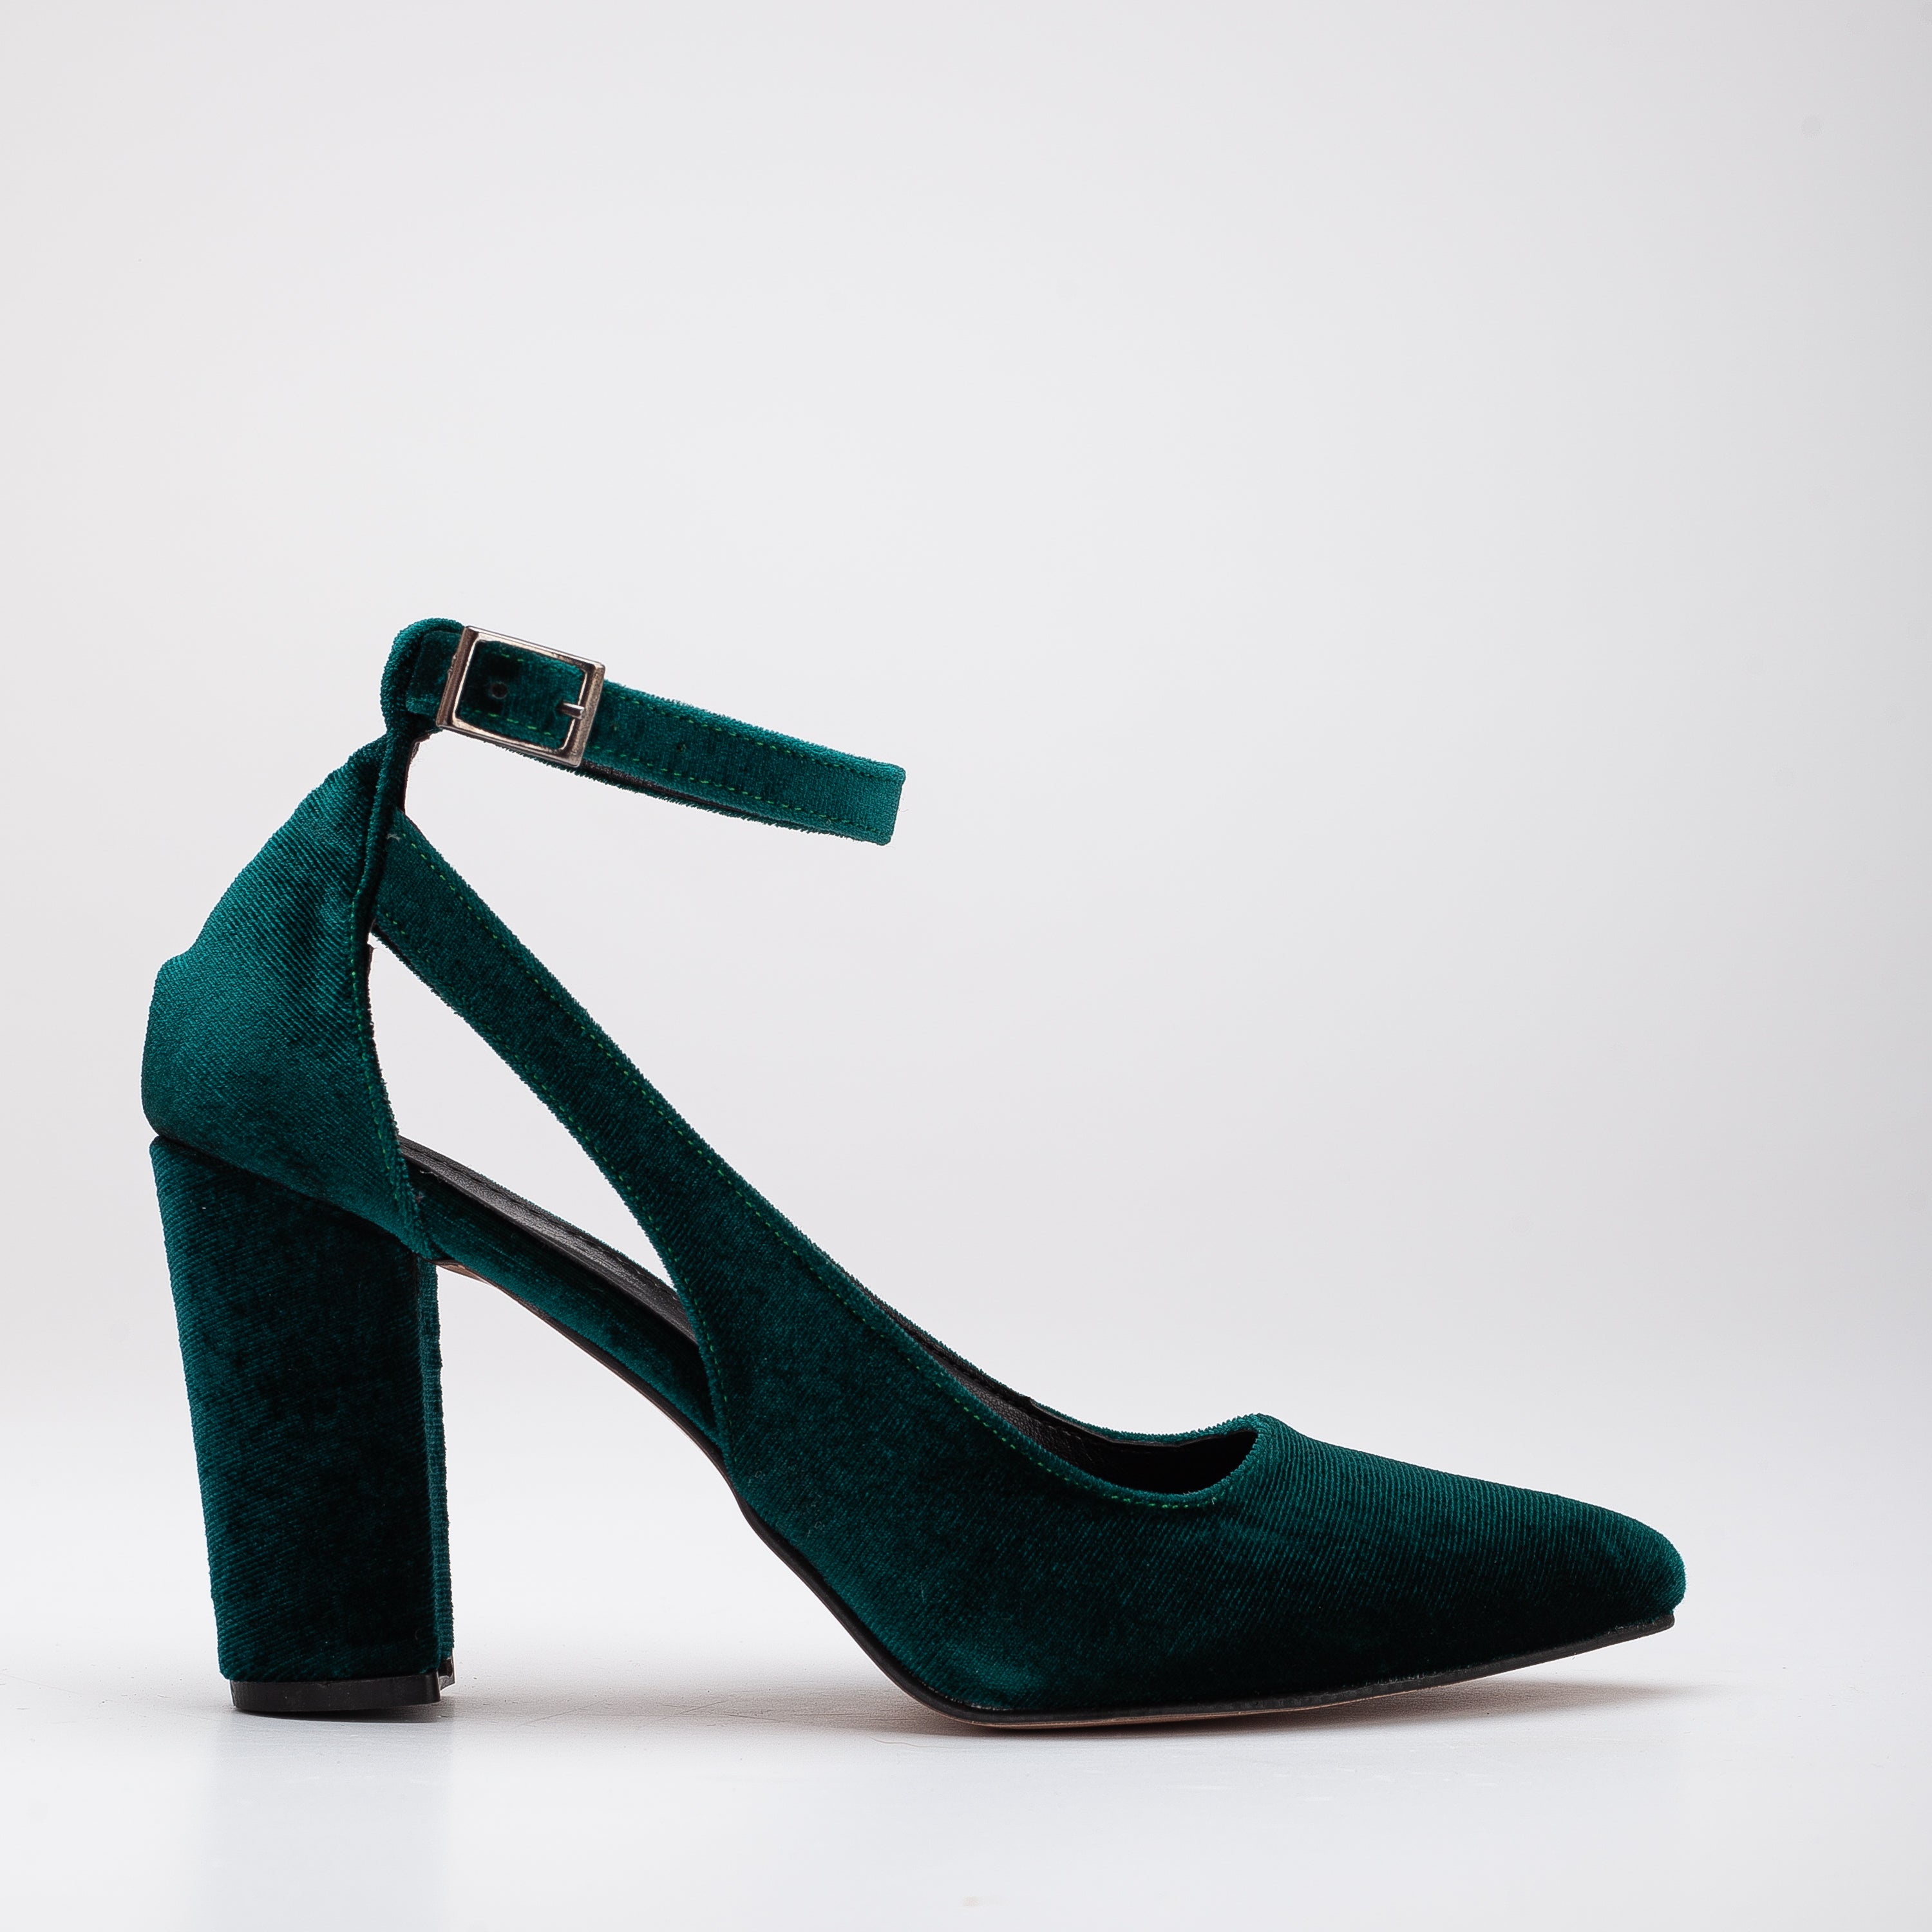 Emerald Green Pumps With Low Kitten Heel From Genuine Leather, Classic  Handmade Evening Women Shoes With Slim Heel and Closed Pointy Toe - Etsy